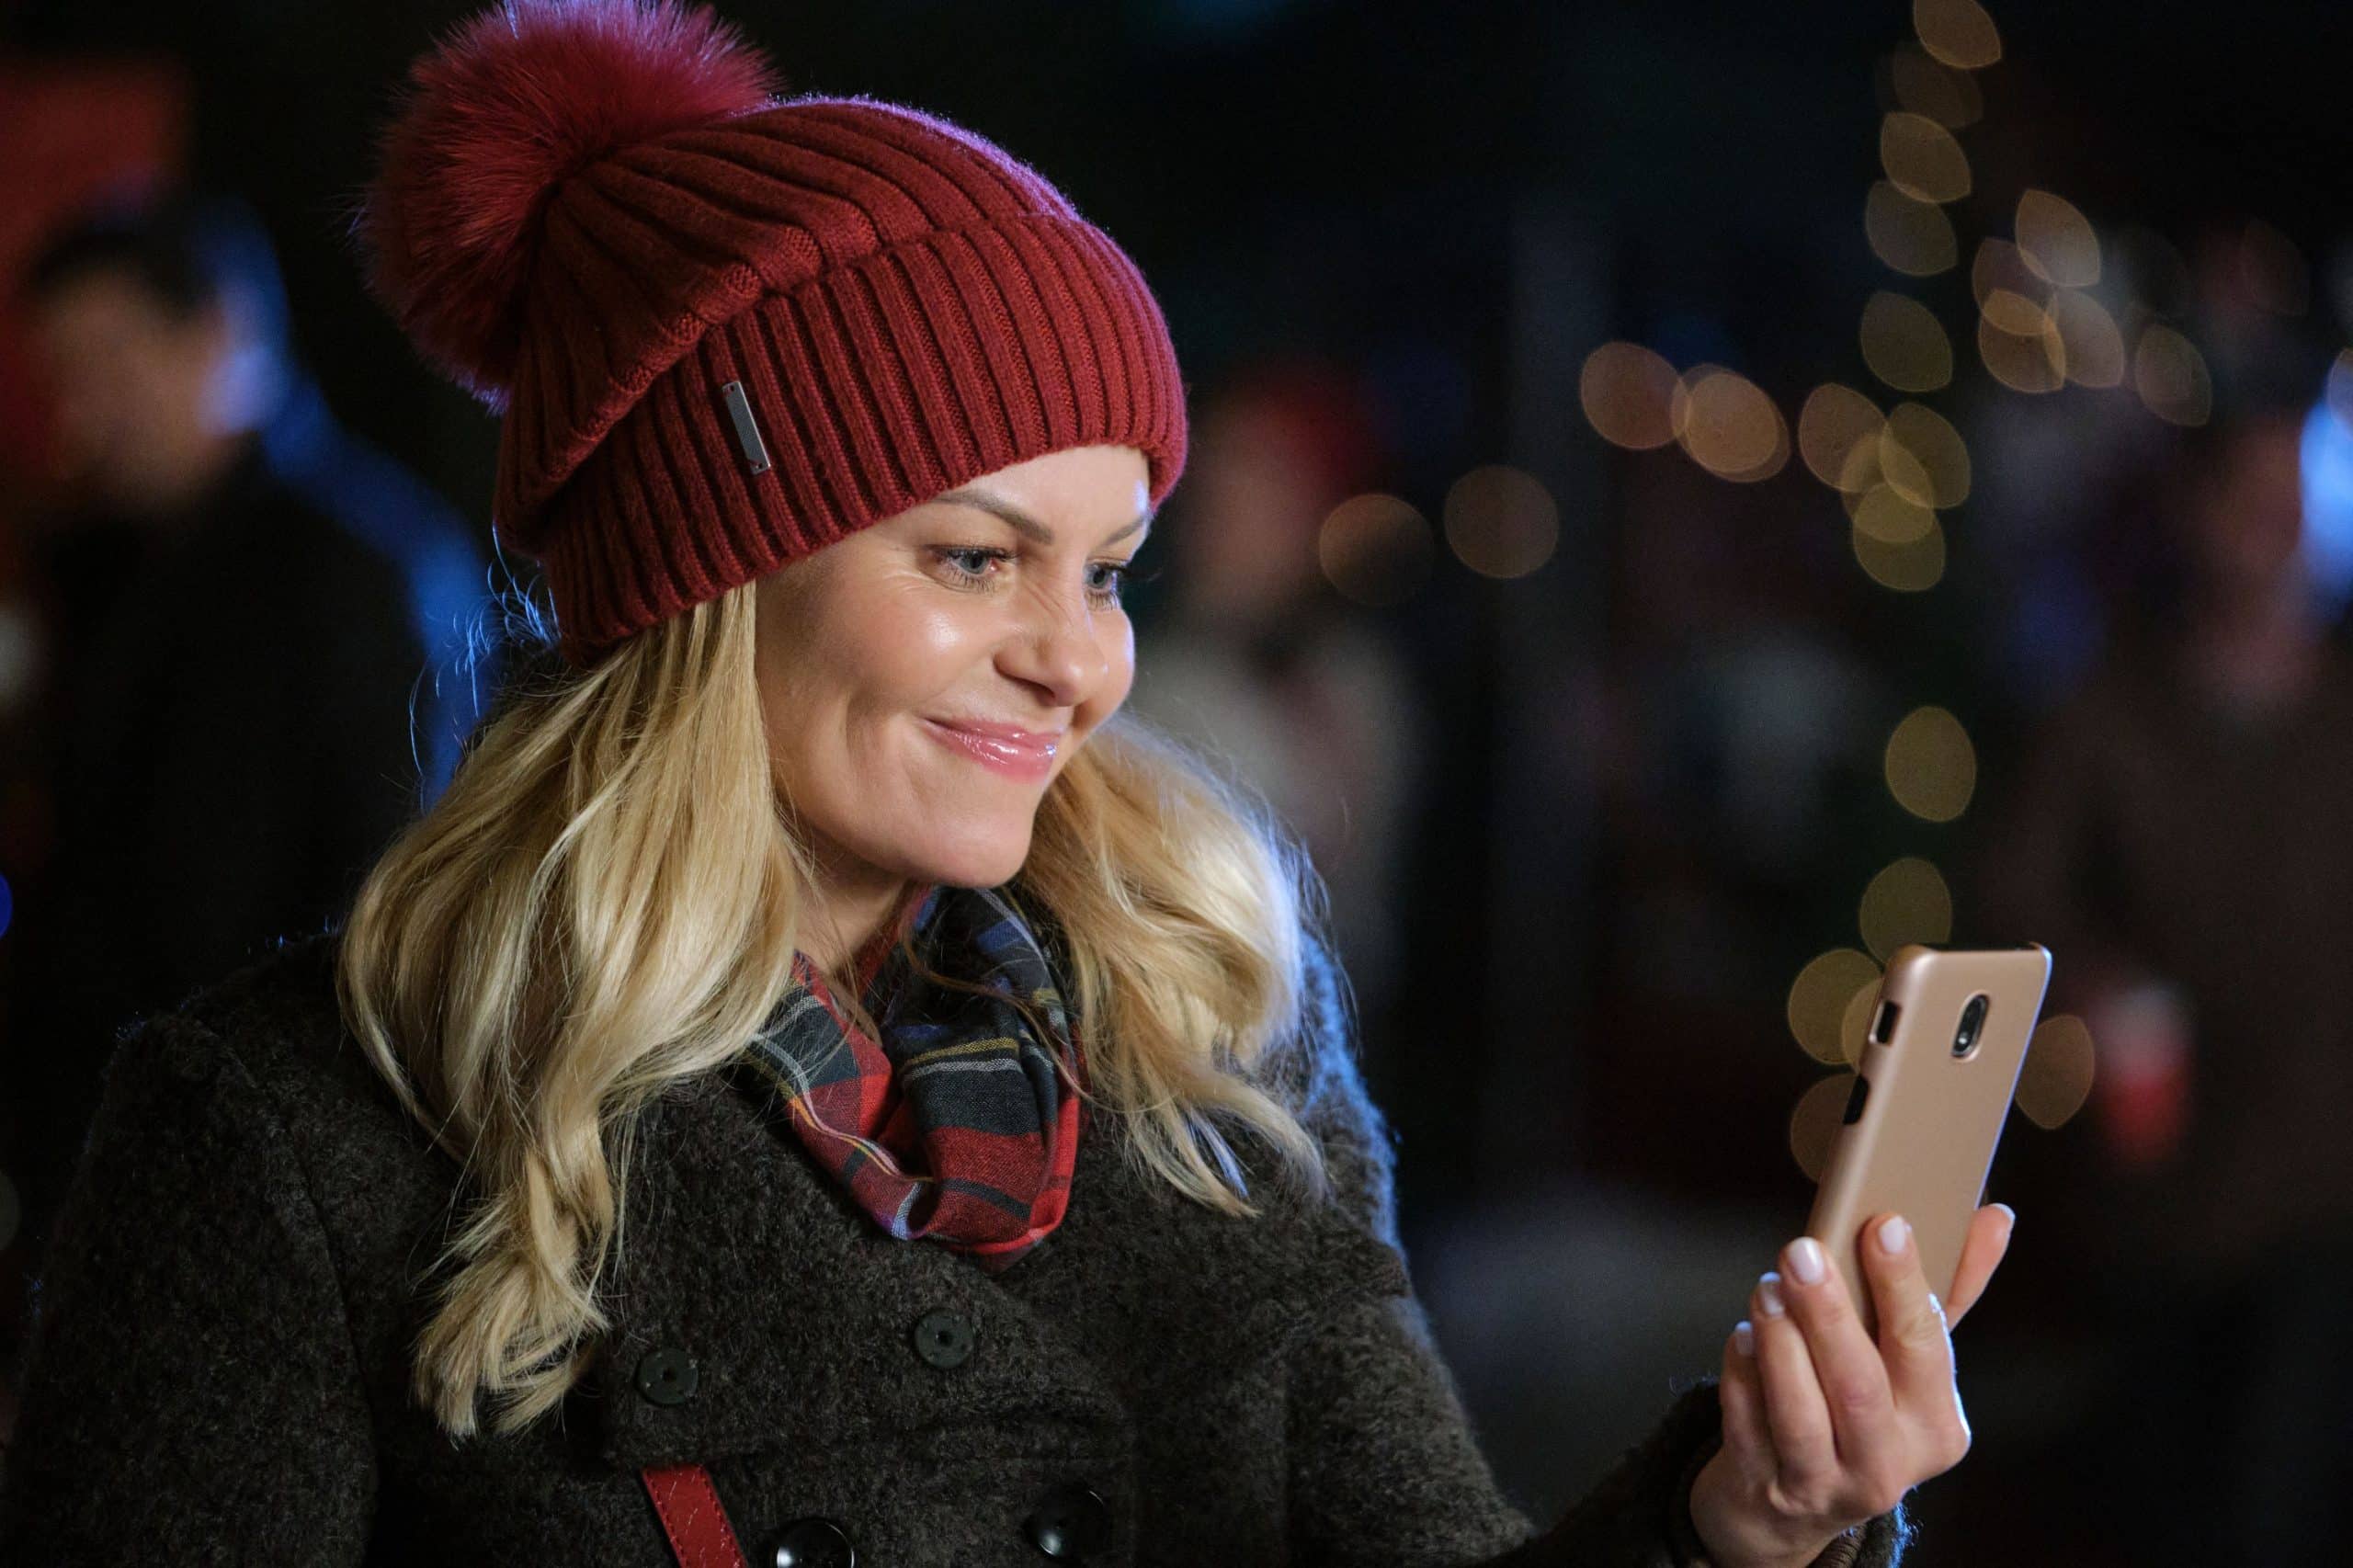 IF I ONLY HAD CHRISTMAS, Candace Cameron Bure, (aired Nov. 29, 2020)